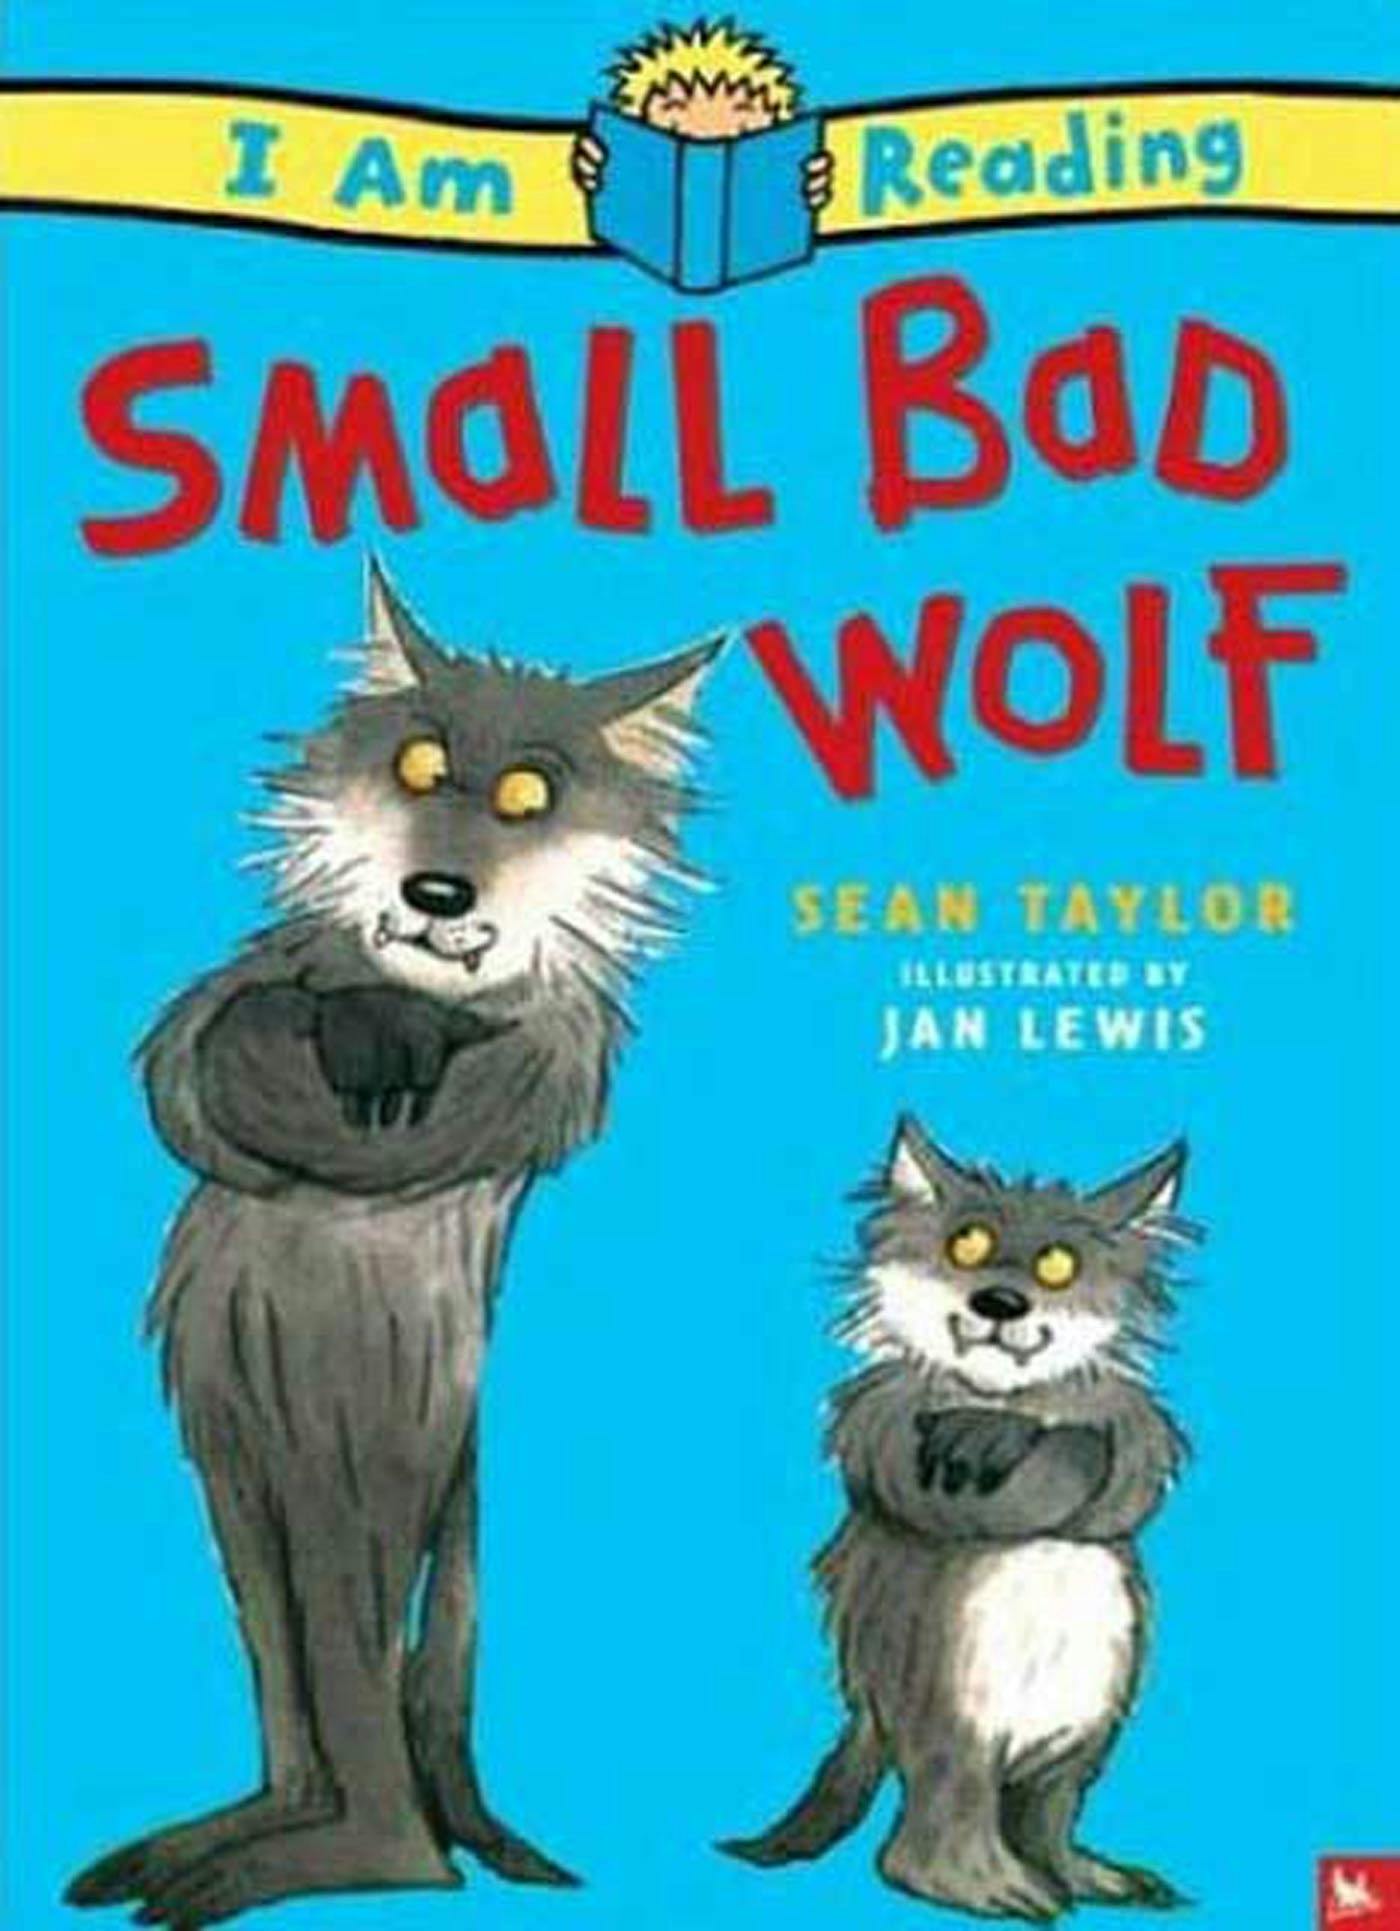 Small Bad Wolf